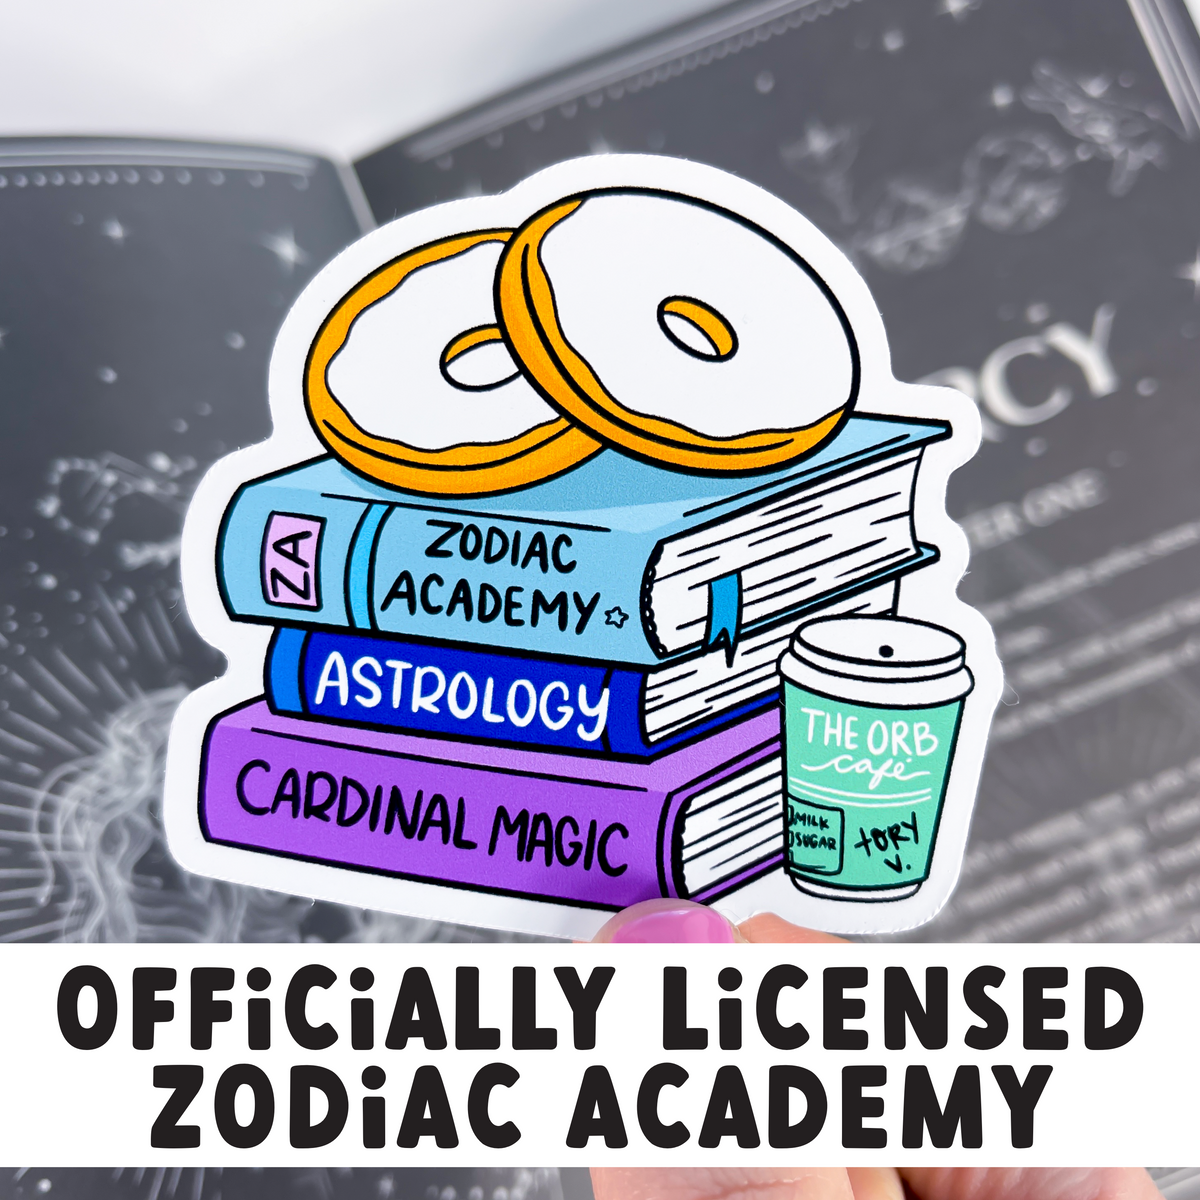 Zodiac Academy Officially Licensed